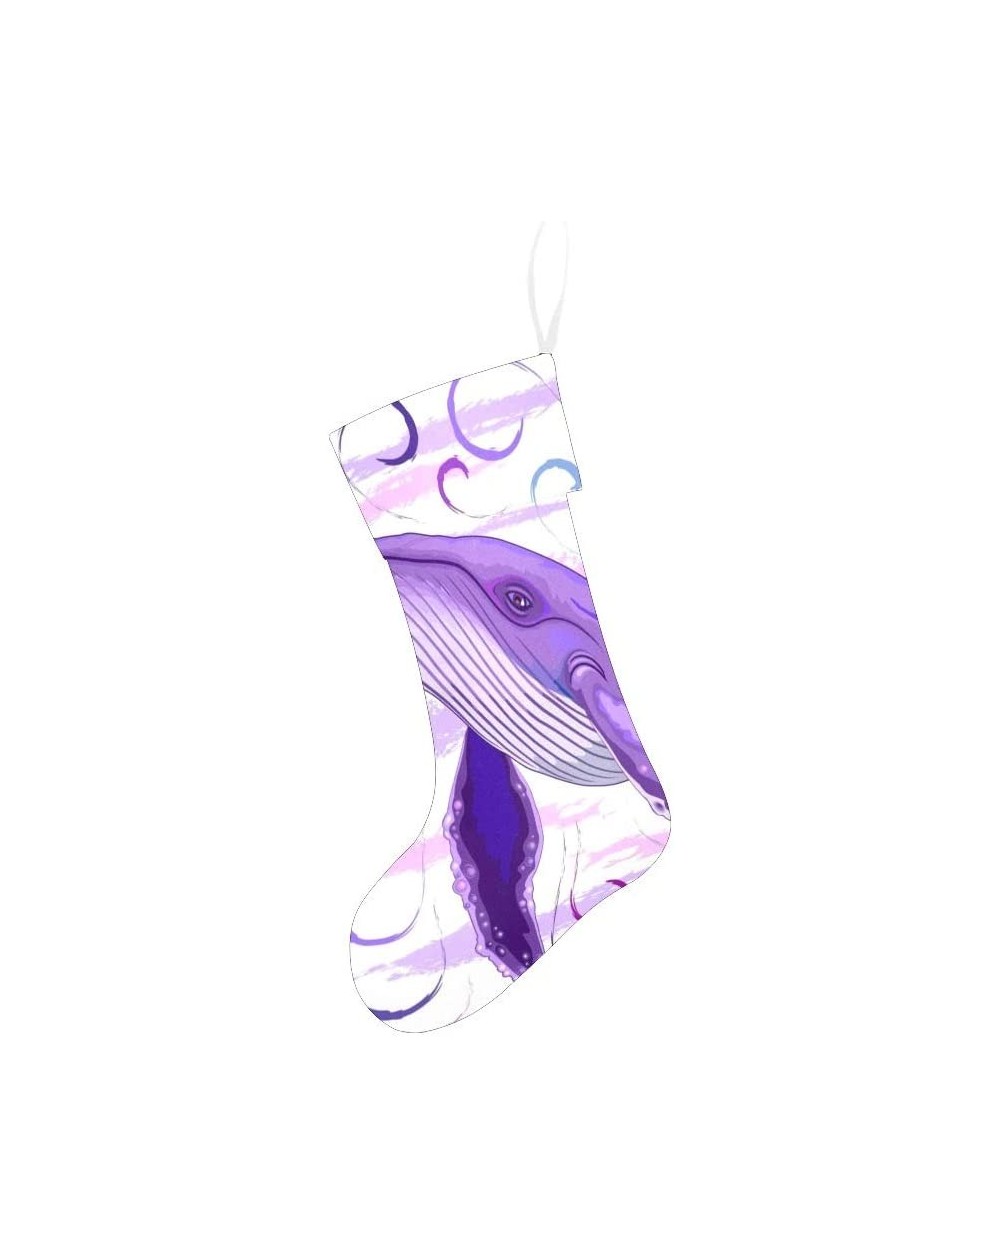 Stockings & Holders Watercolor Purple Whale Christmas Stocking for Family Xmas Party Decoration Gift 17.52 x 7.87 Inch - Mult...